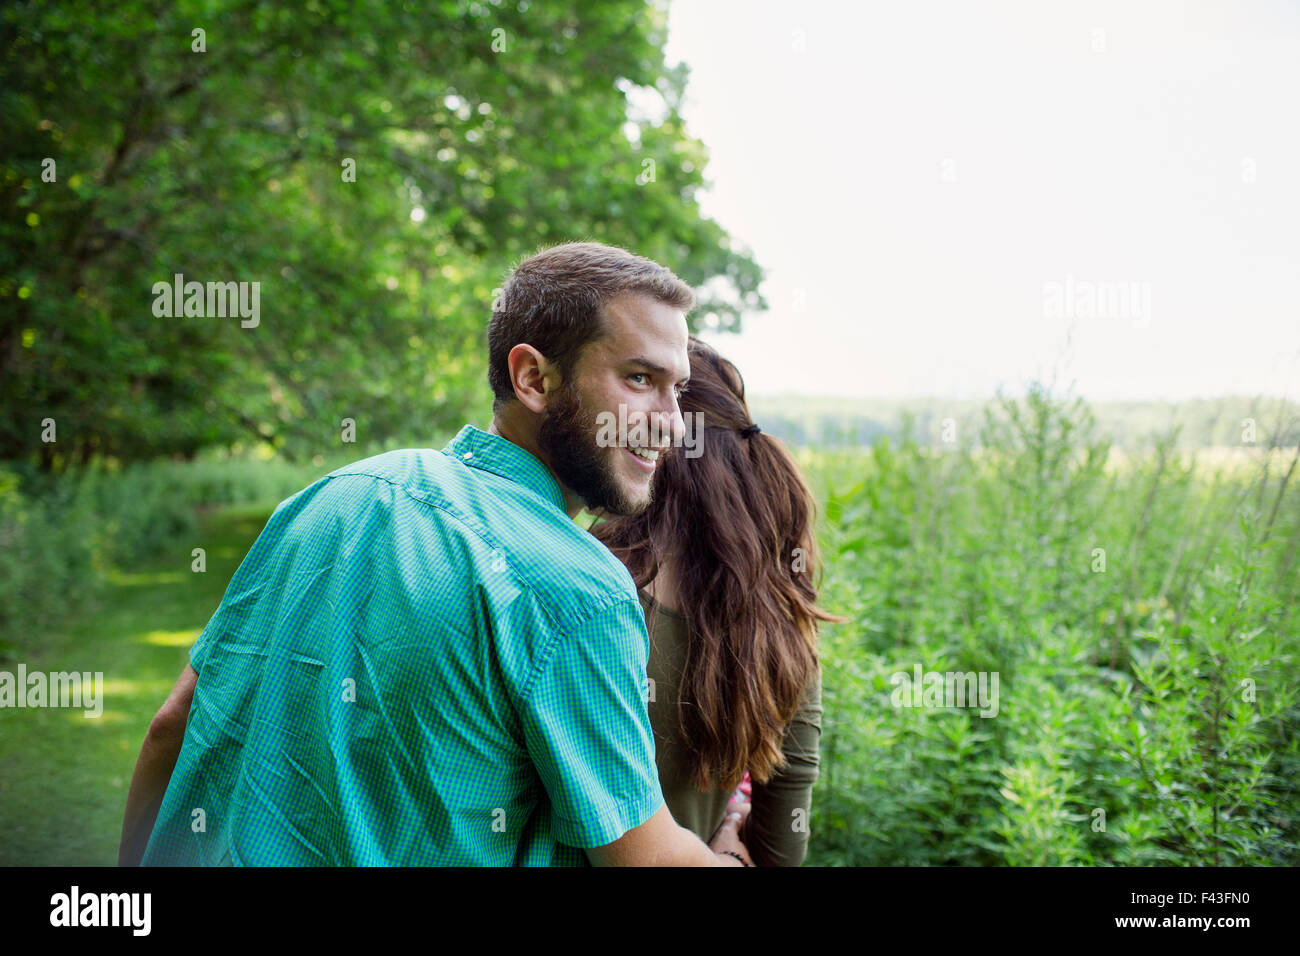 A man and woman walking through a meadow, through the long grass on a summer day. Stock Photo